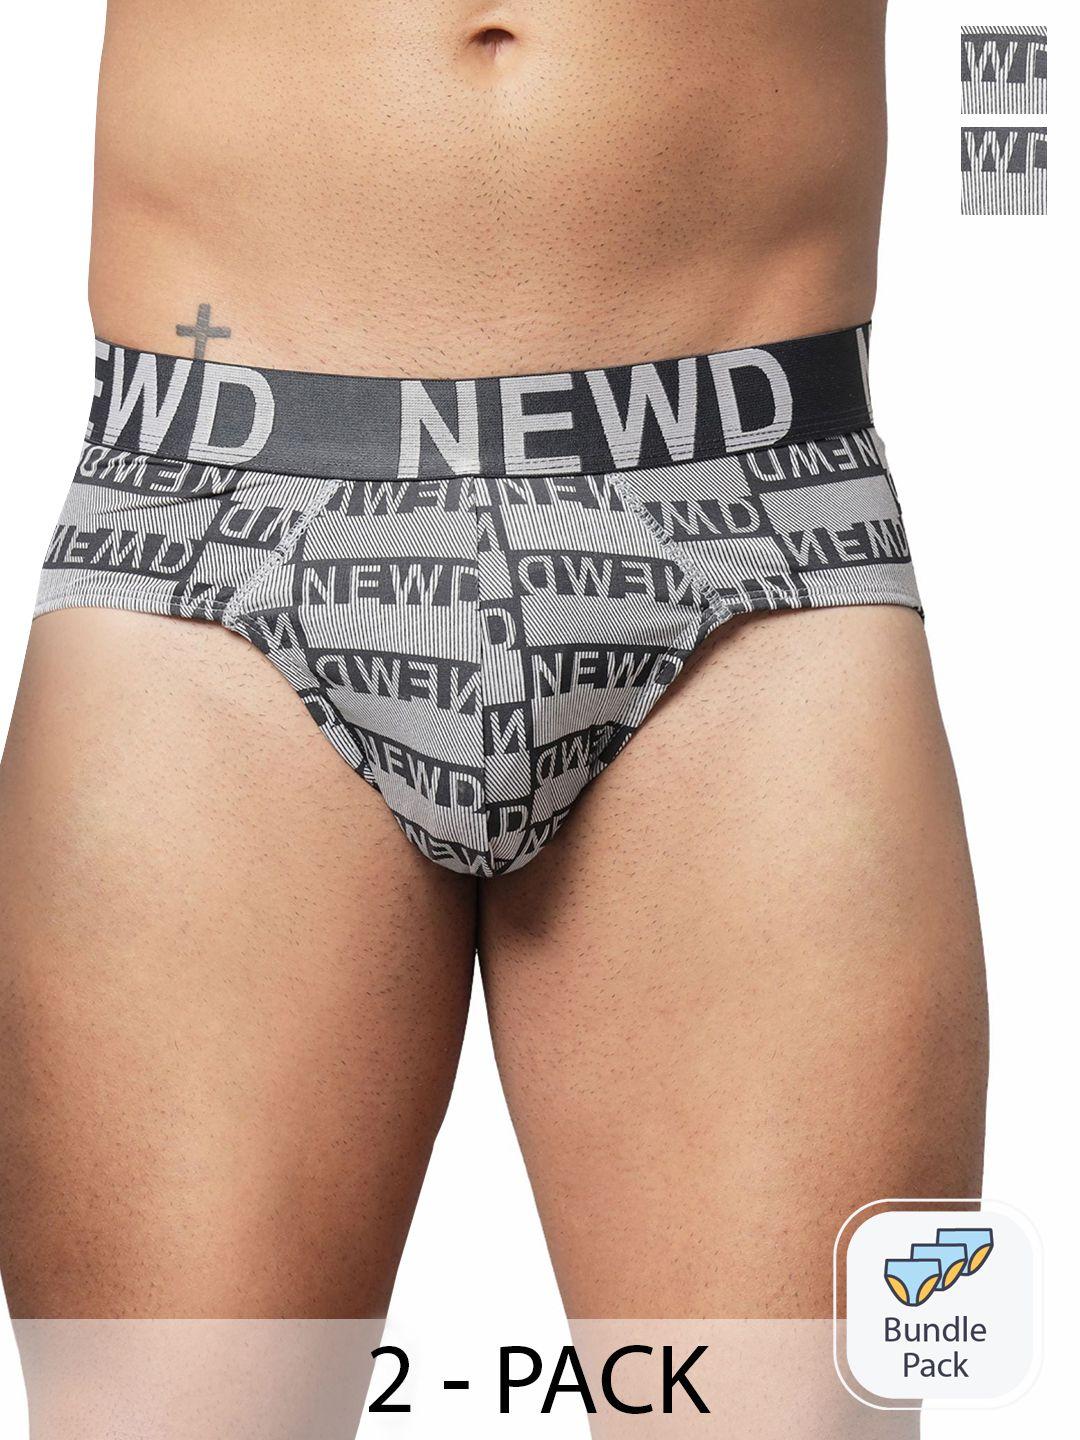 newd pack of 2 printed basic briefs nbp13-grey-c2-s